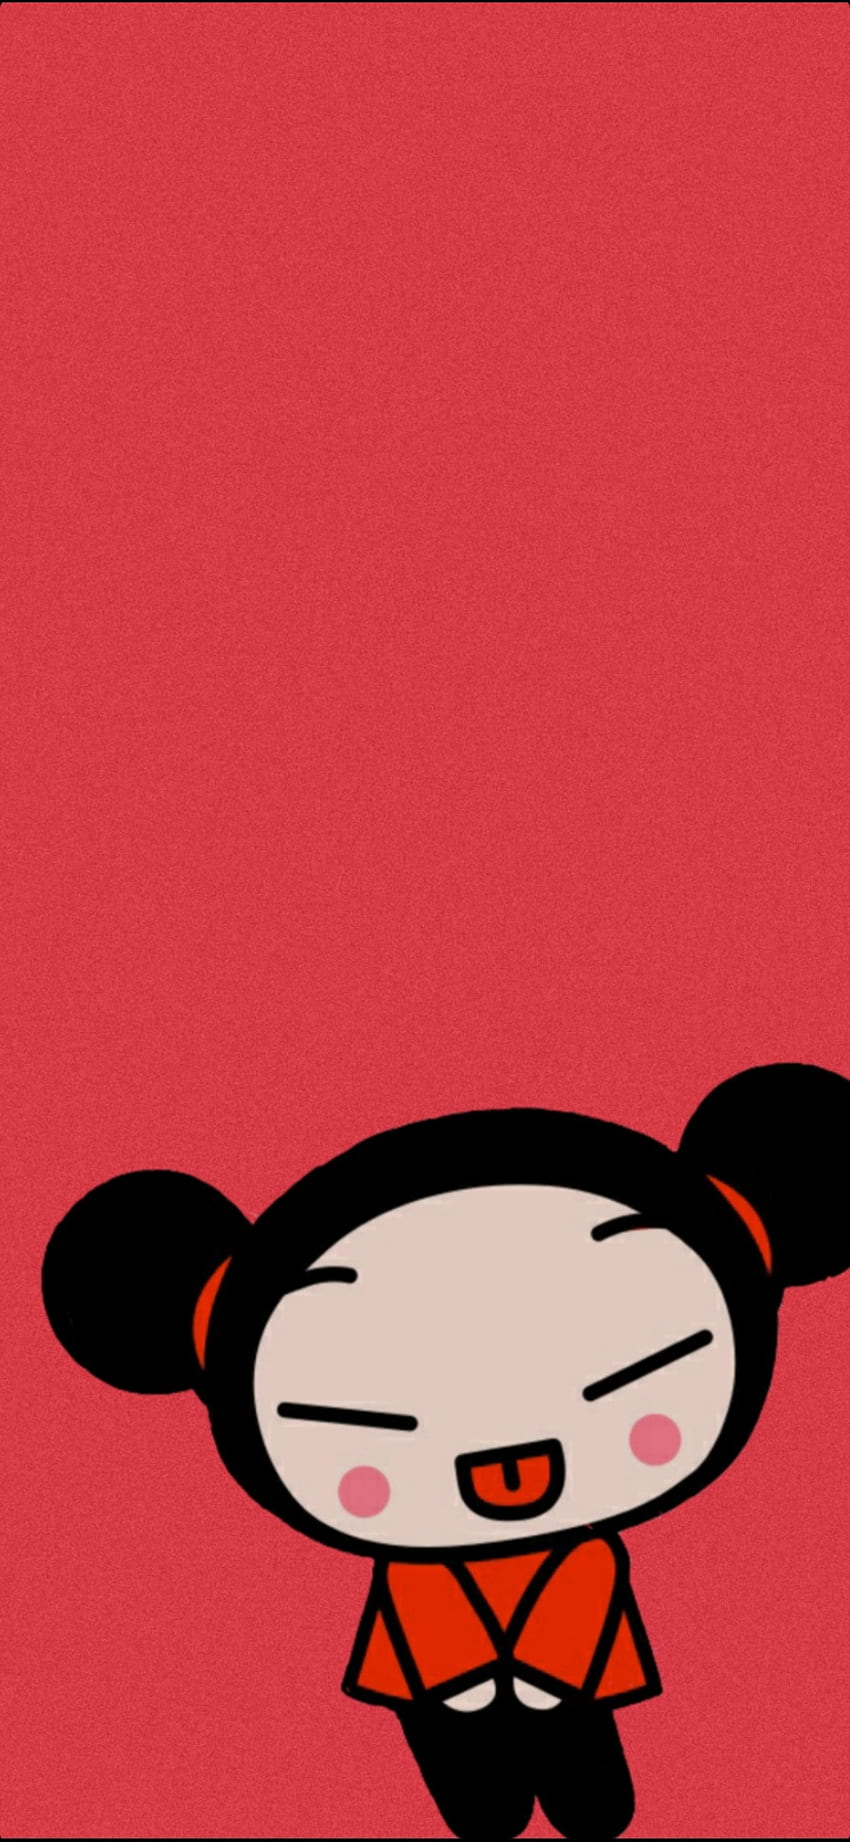 Pucca and Garu fighting poses by Lessue on Tumblr | Pucca, Cartoon as anime,  Anime